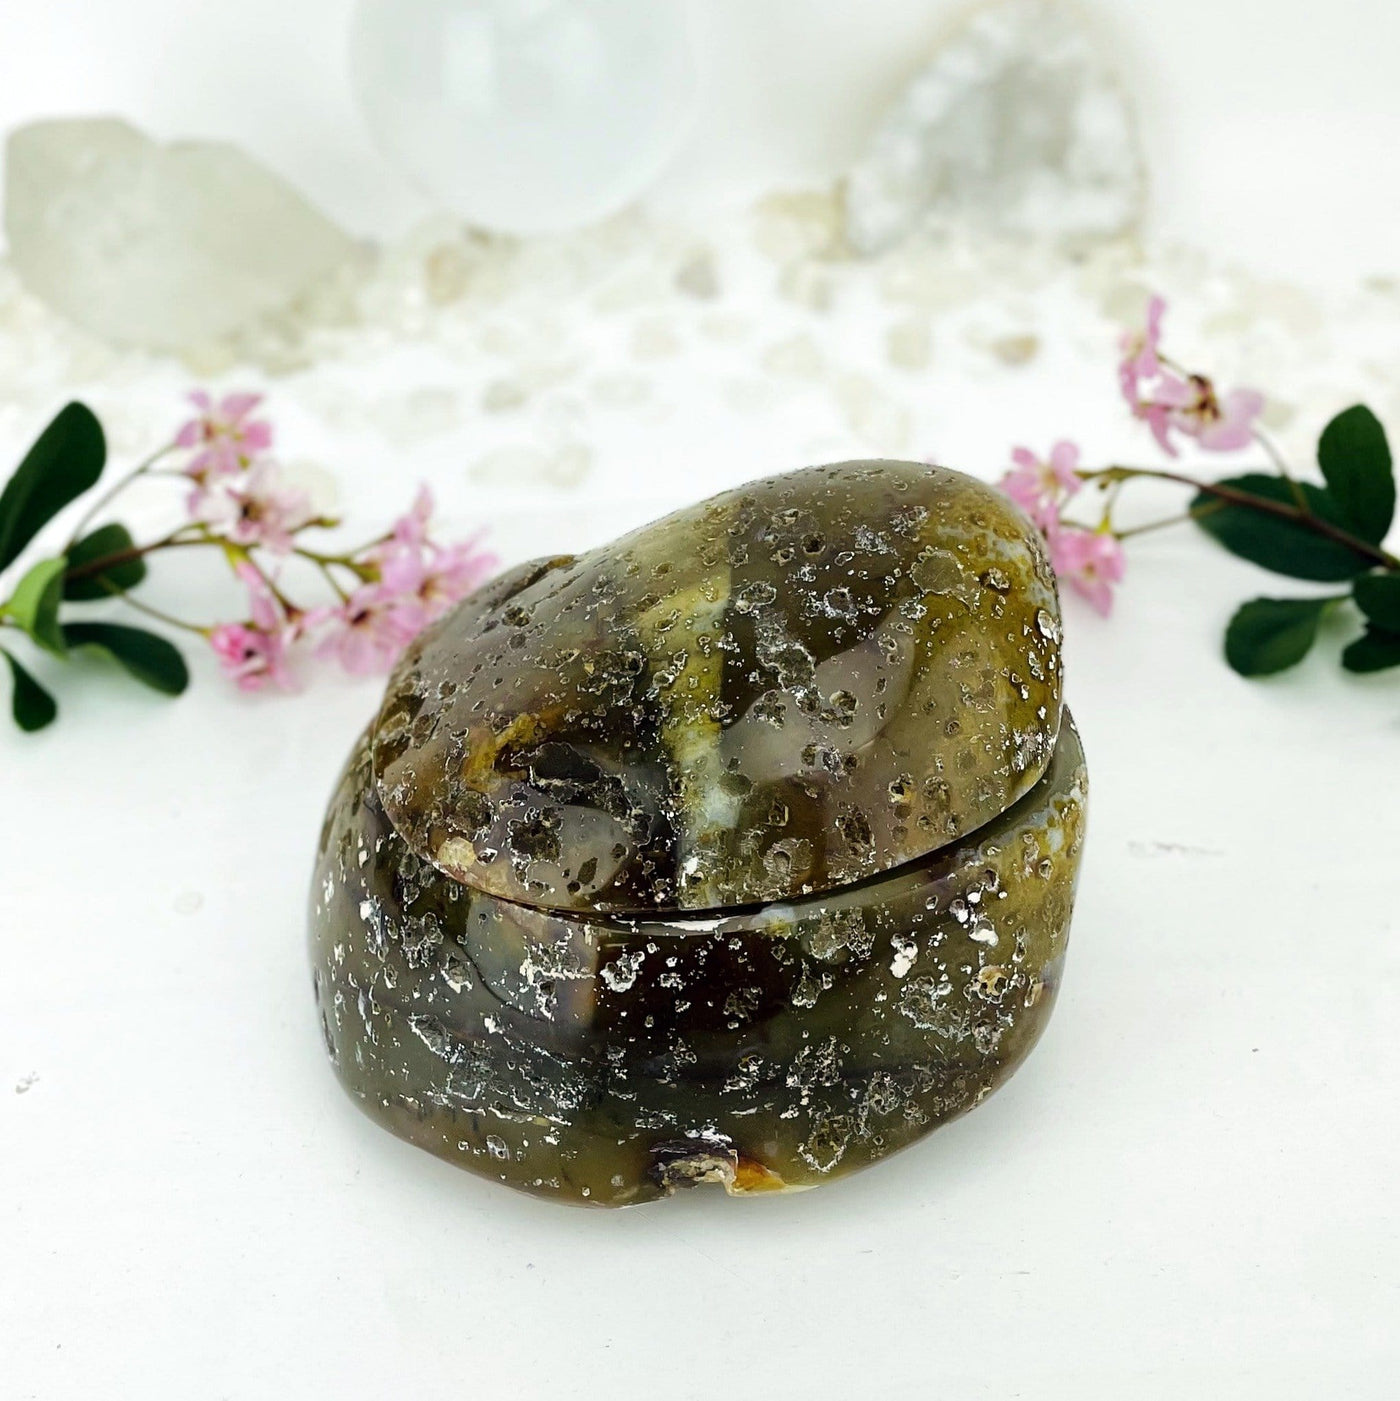 Agate geode box closed displaying the external polished surface on a light colored background. Plants in the background.